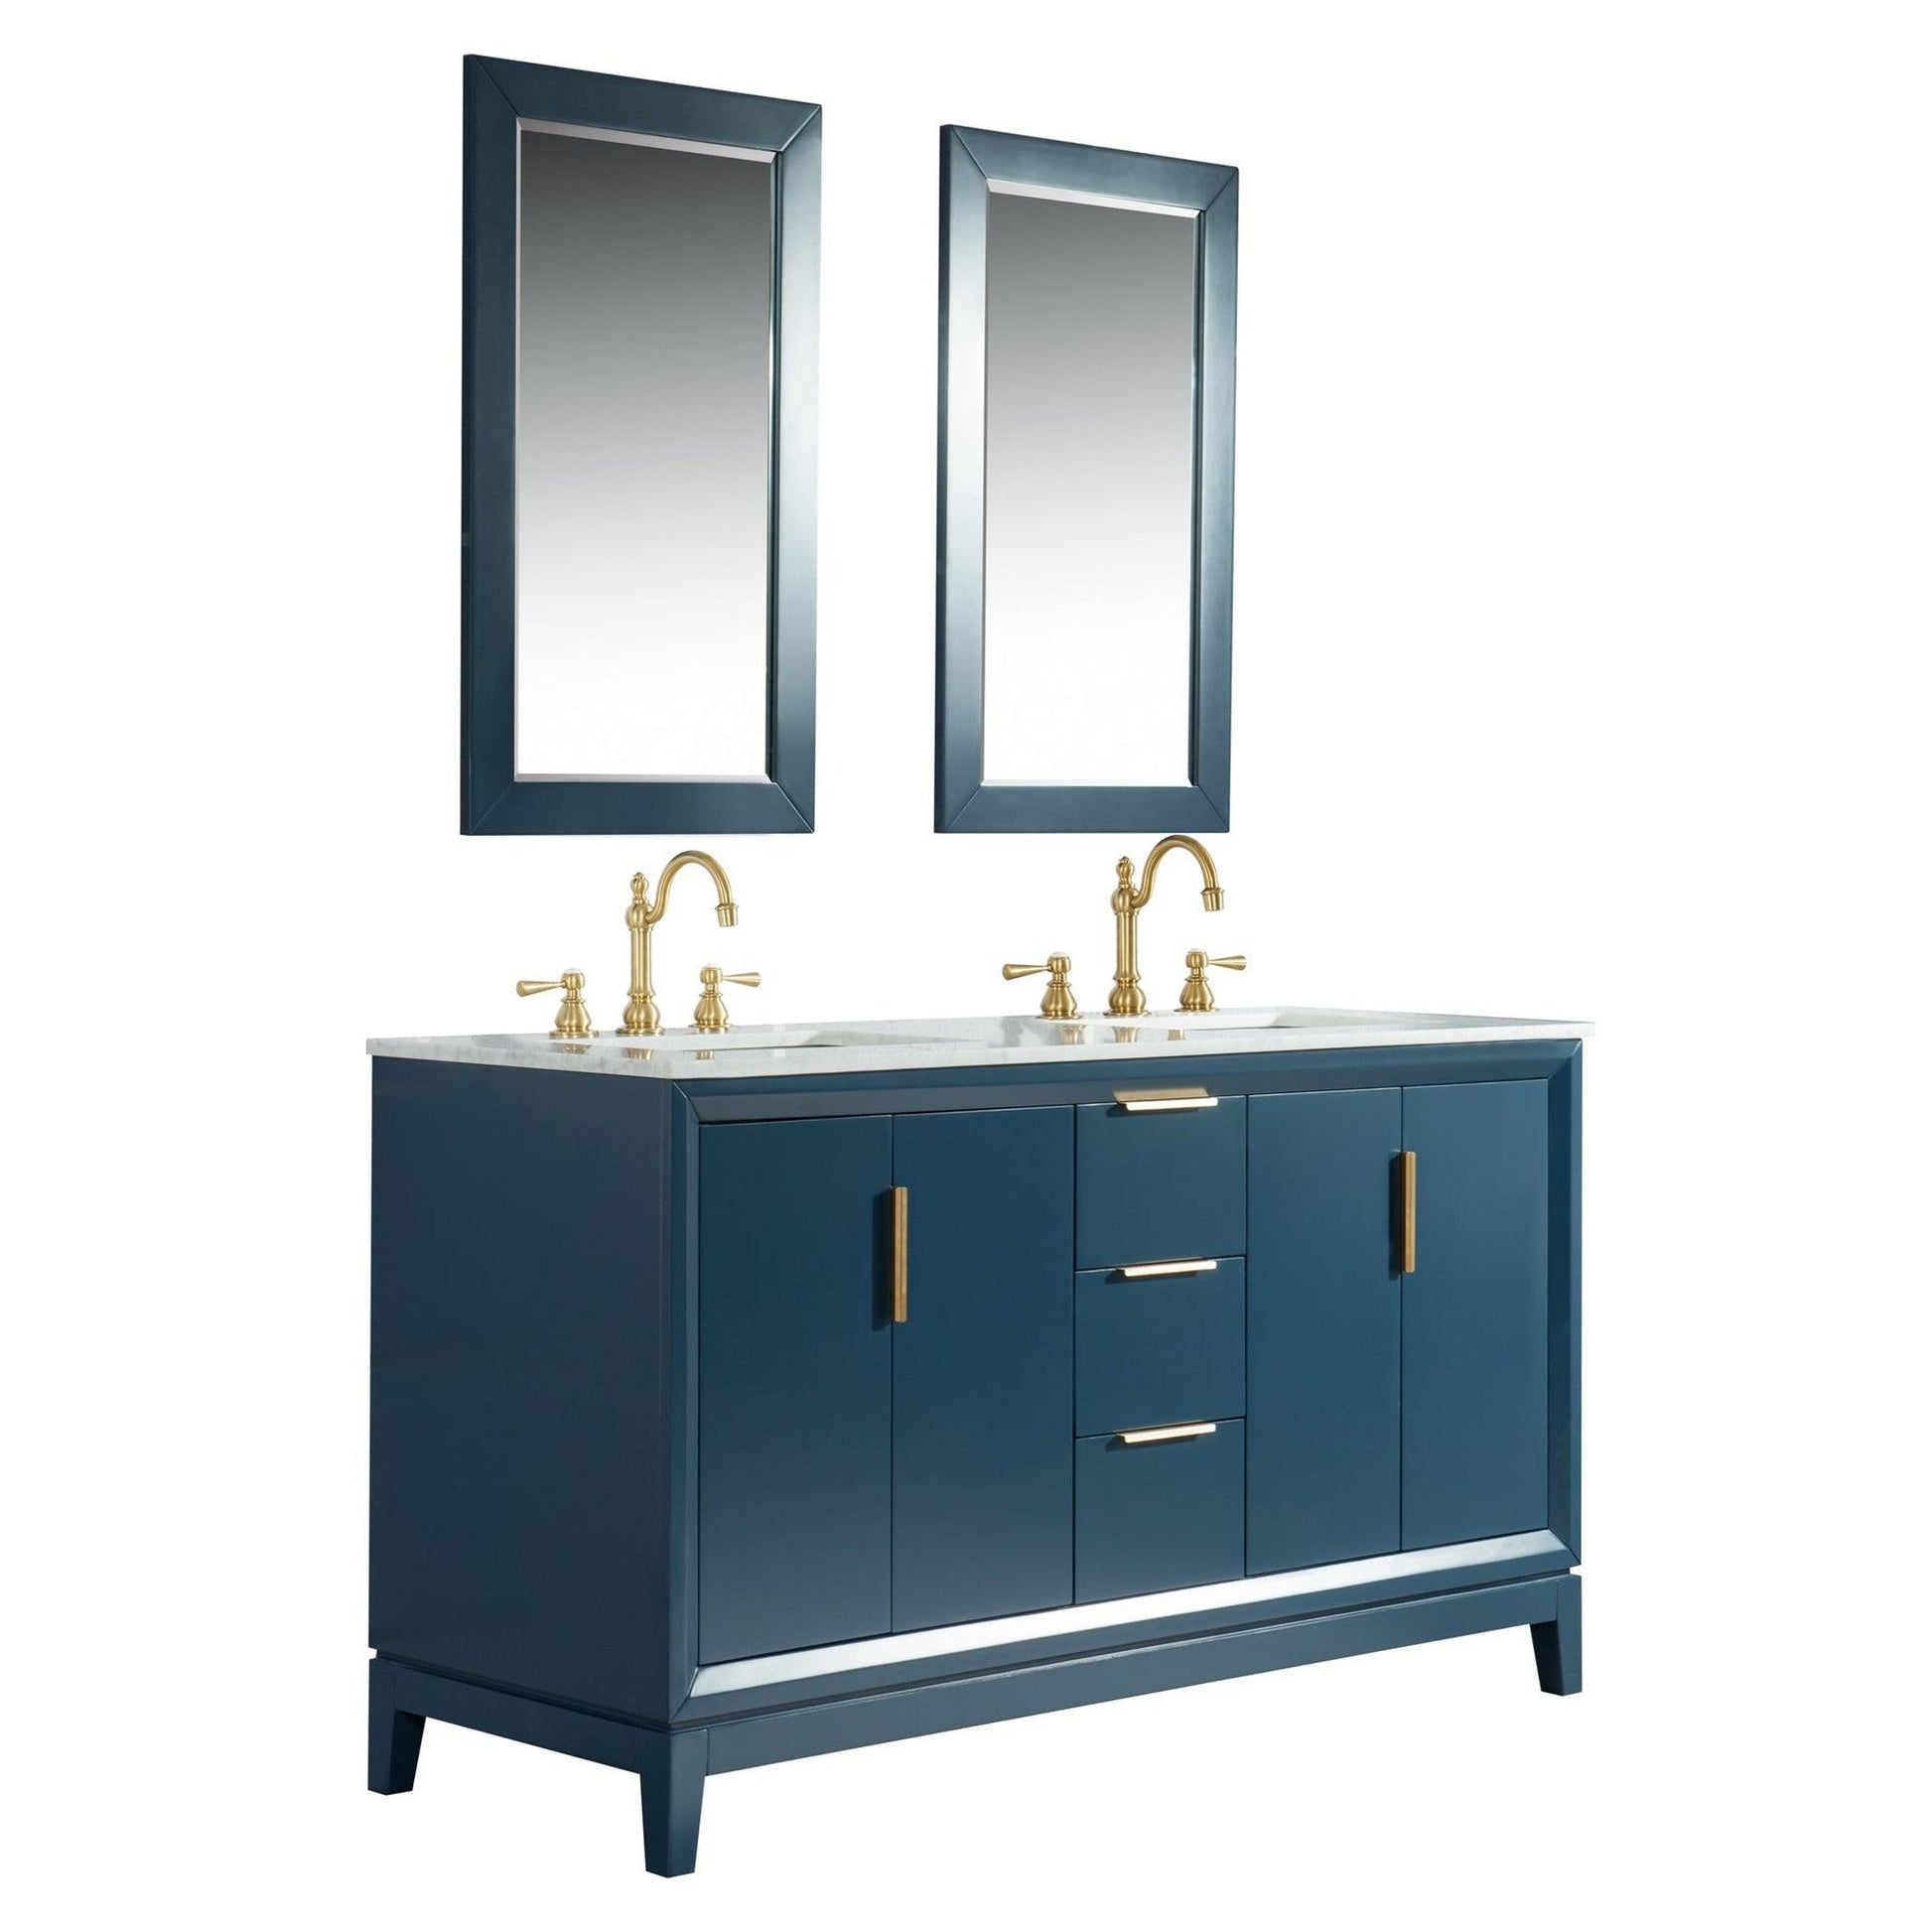 Water Creation Elizabeth 60" Double Sink Carrara White Marble Vanity In Monarch Blue With Matching Mirror and F2-0012-06-TL Lavatory Faucet